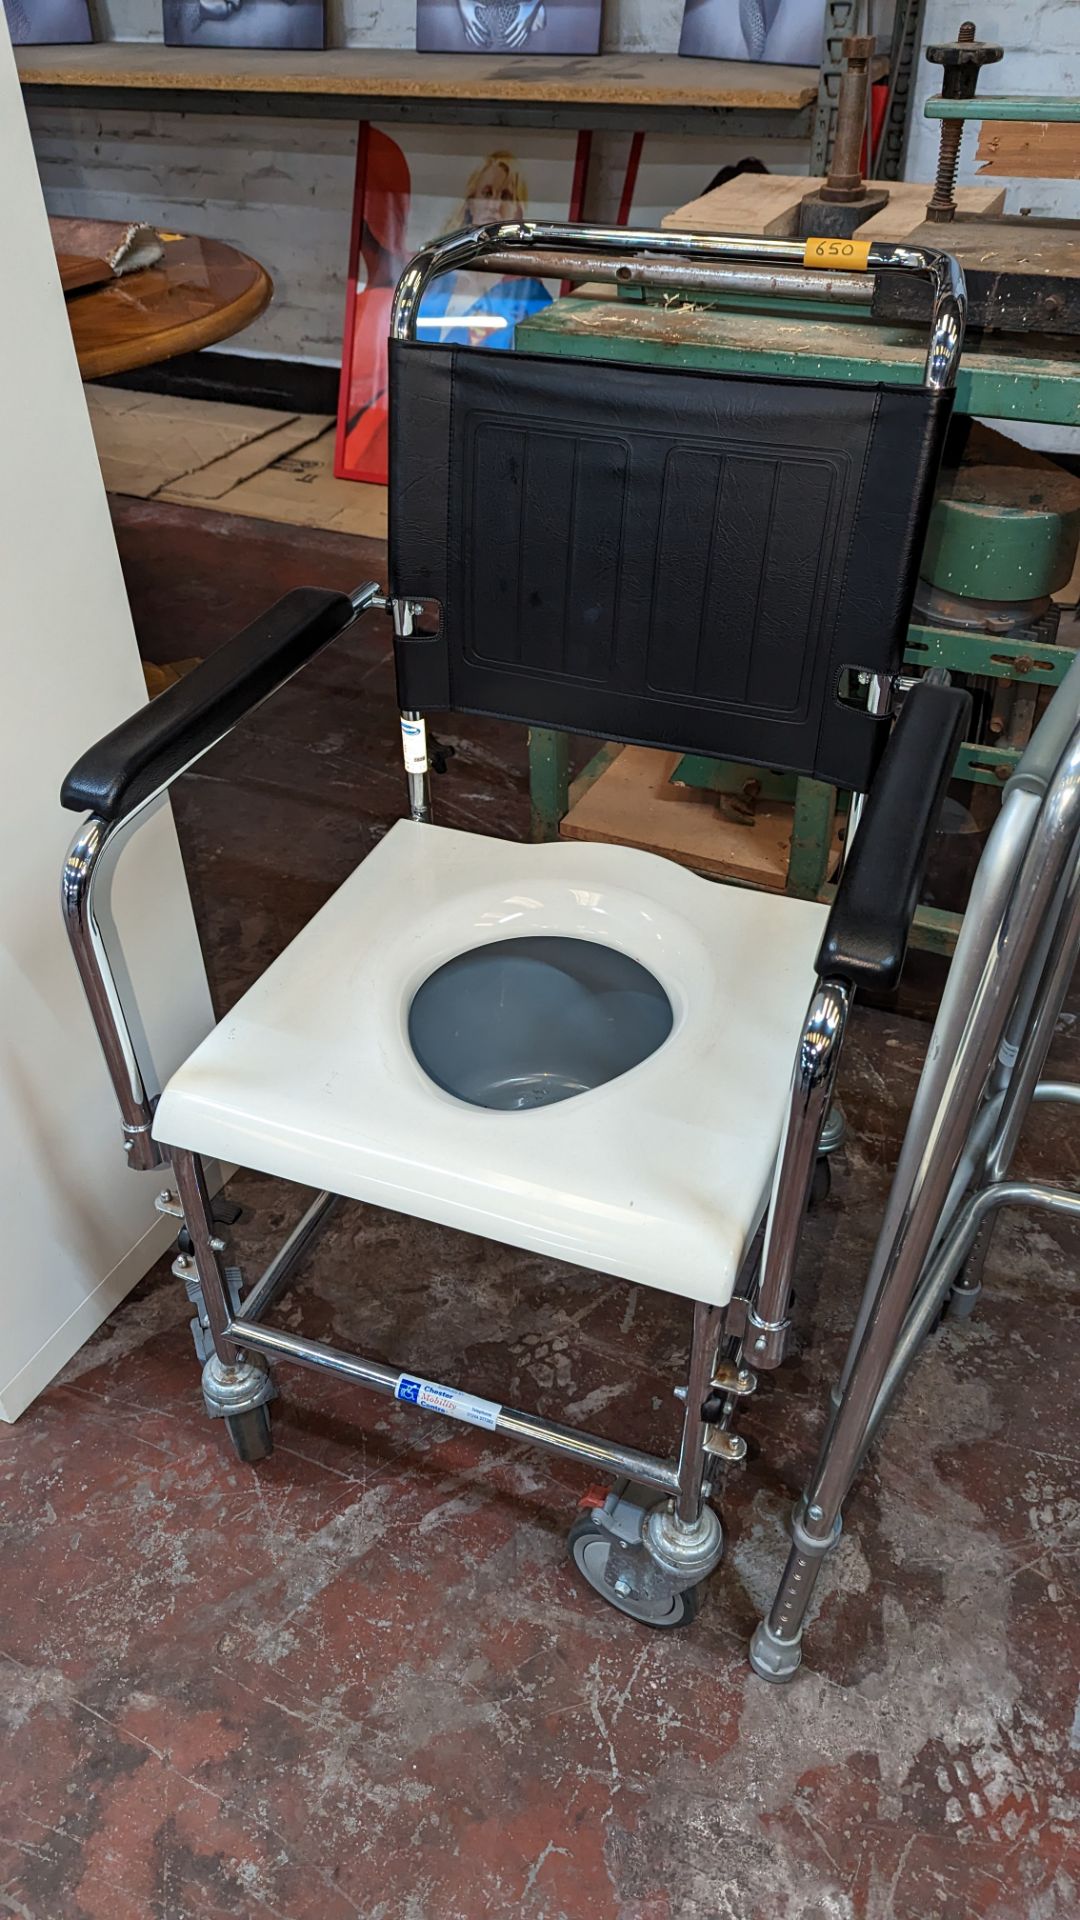 Mobile commode chair plus 2 mobile walking frames - Image 3 of 6